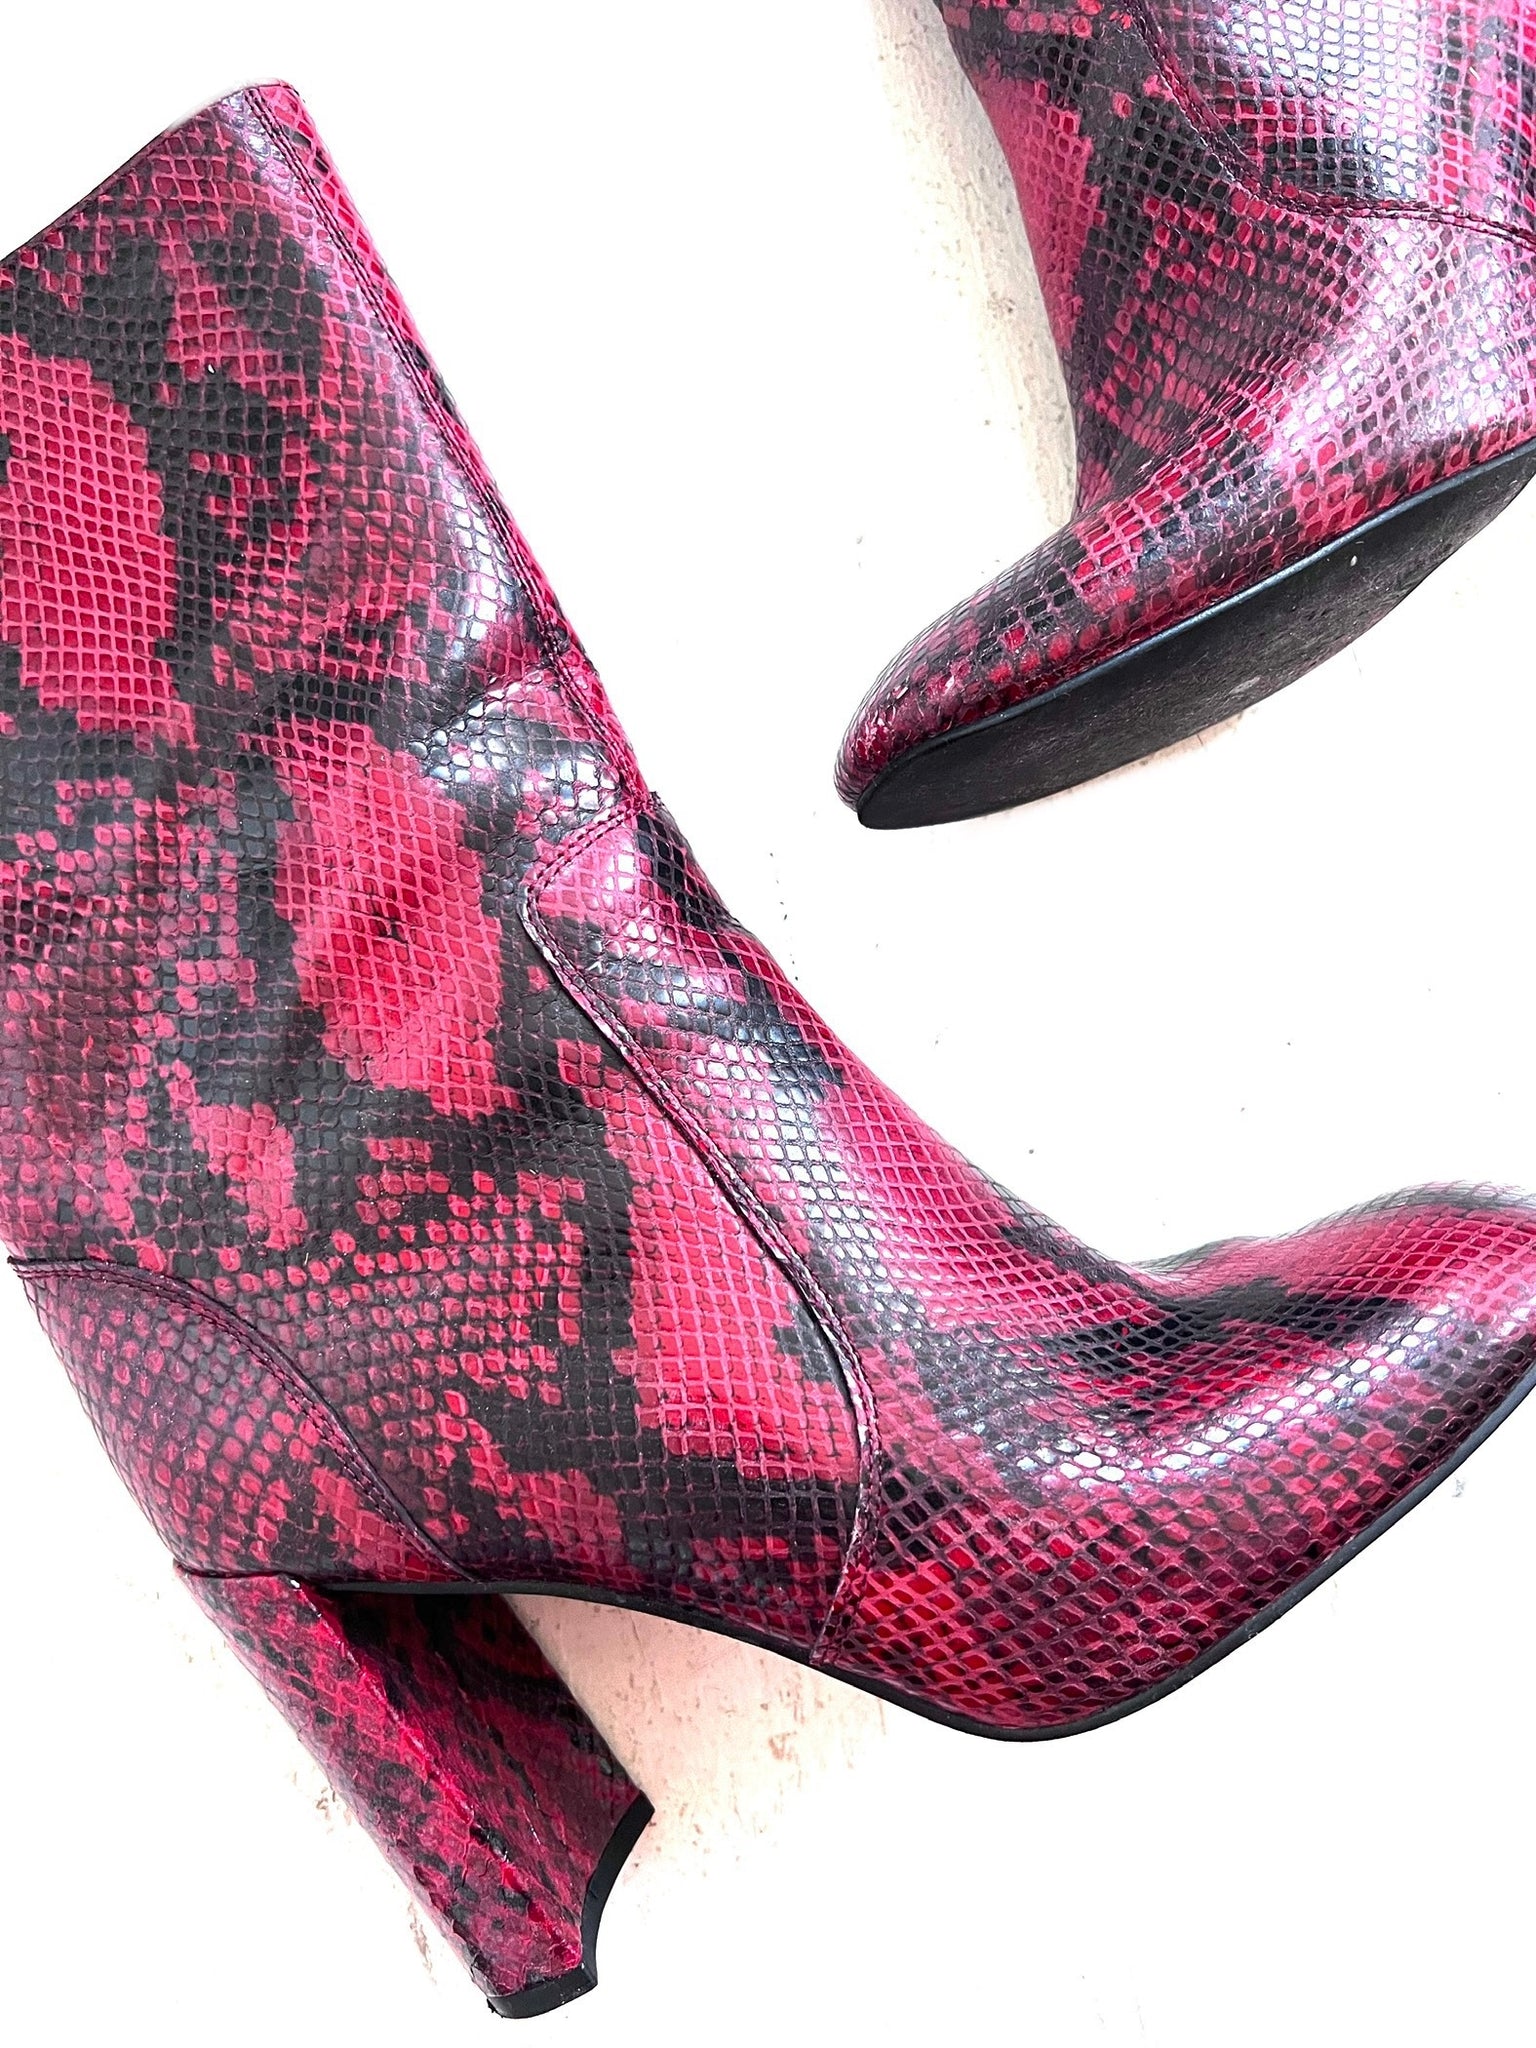 Red Leather Snakeskin Boots